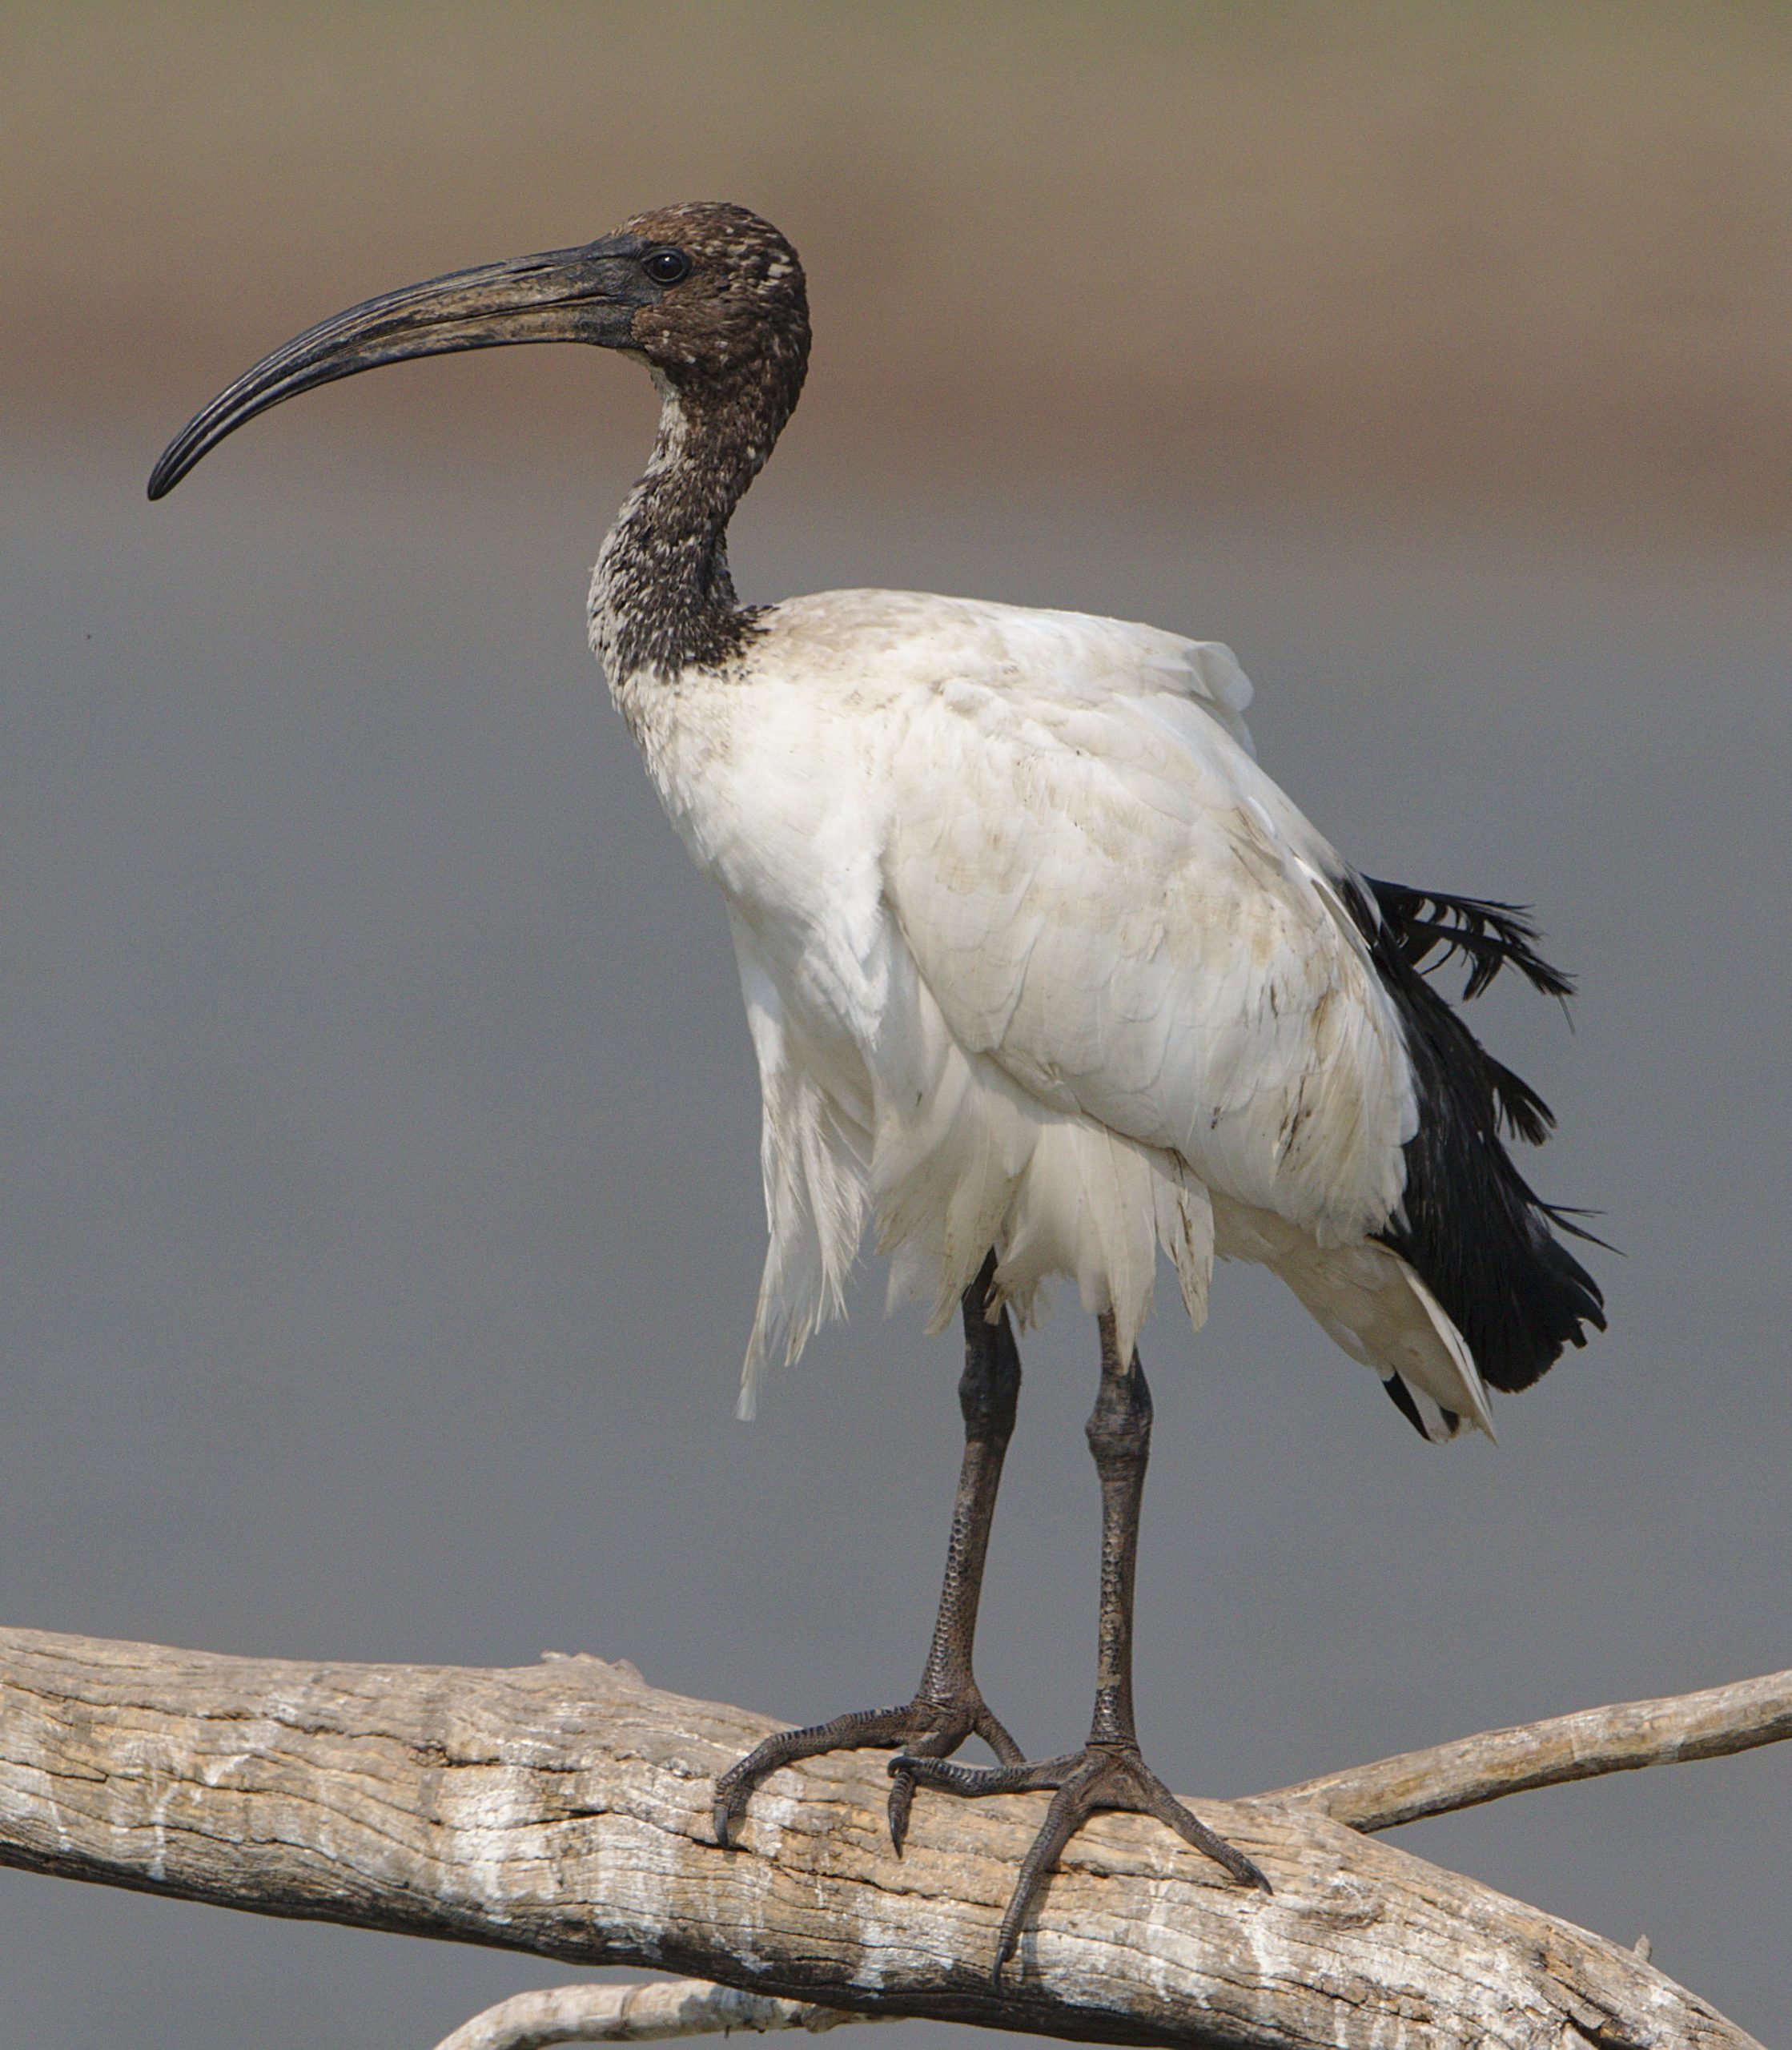 A photo of the sacred Ibis bird of Africa